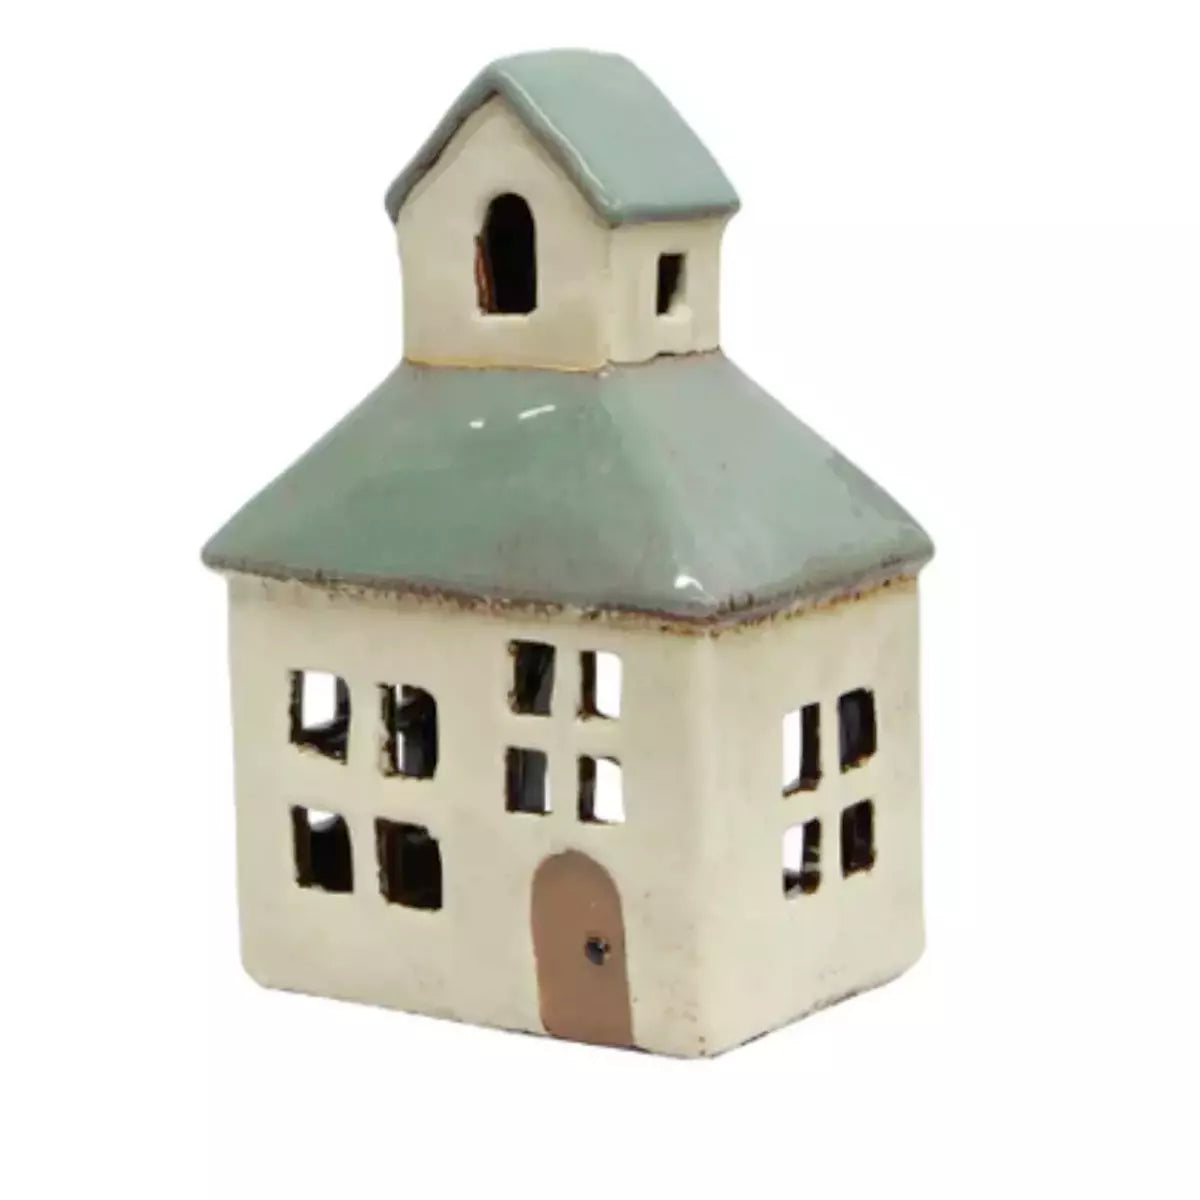 A charming French Country Collections Christmas Village Mini Church tea light holder sitting on a white background.